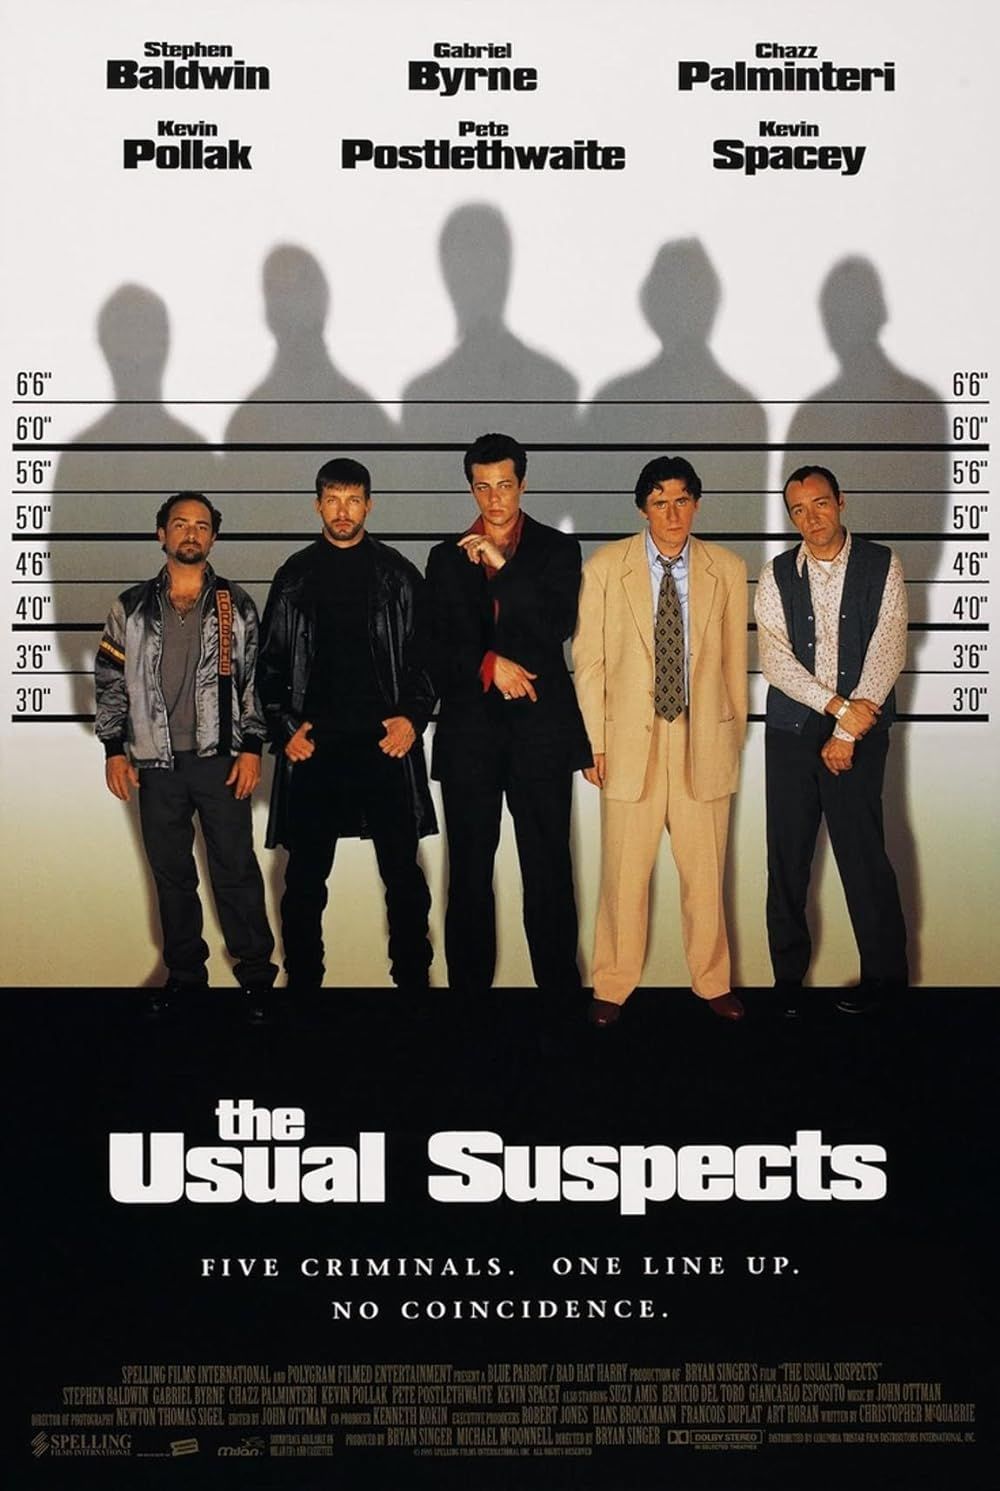 The five main characters of The Usual Suspects lined up